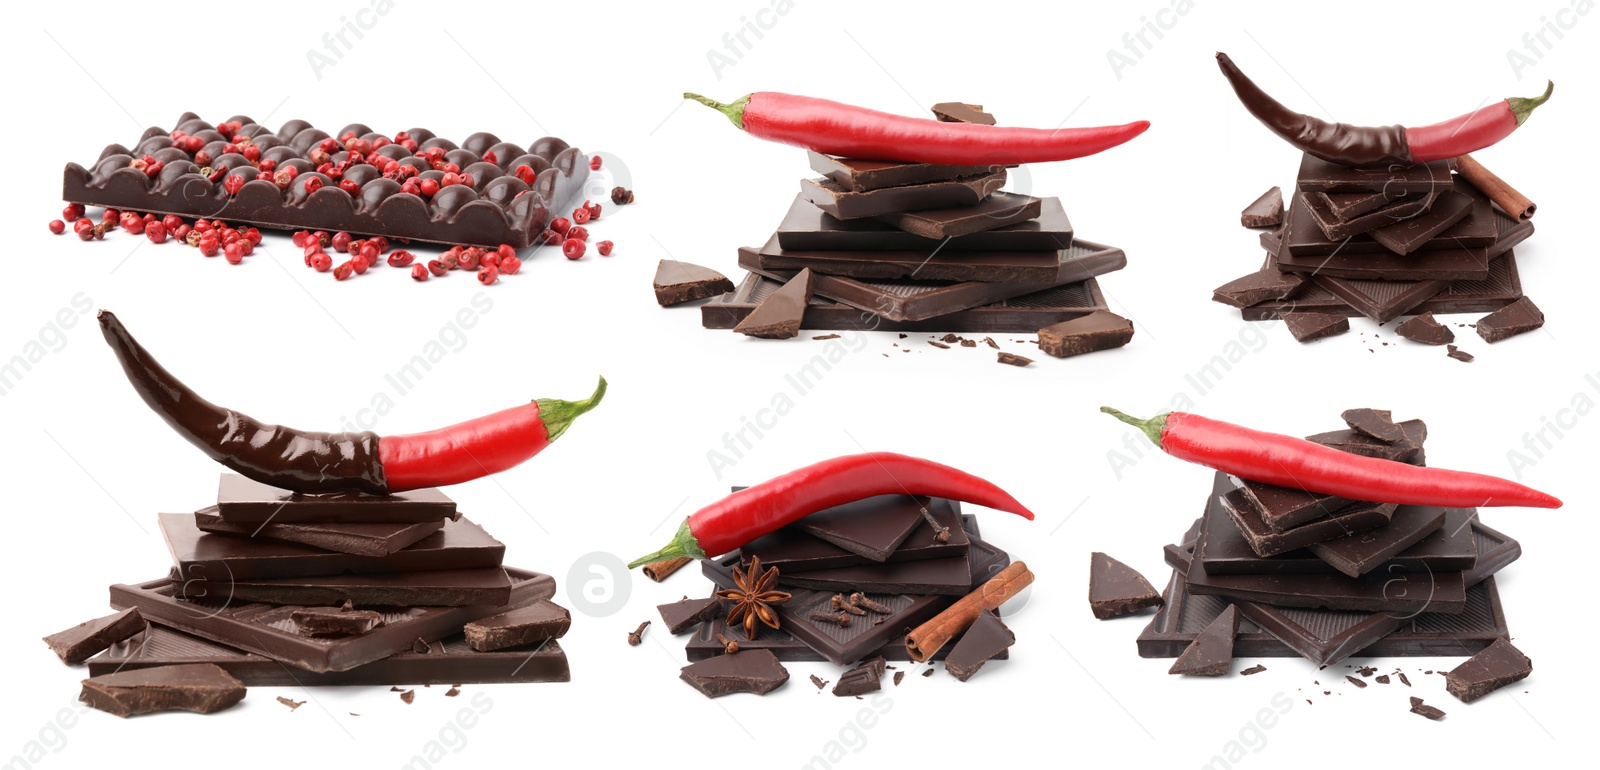 Image of Collage with delicious chocolate, red peppercorns and chili peppers on white background